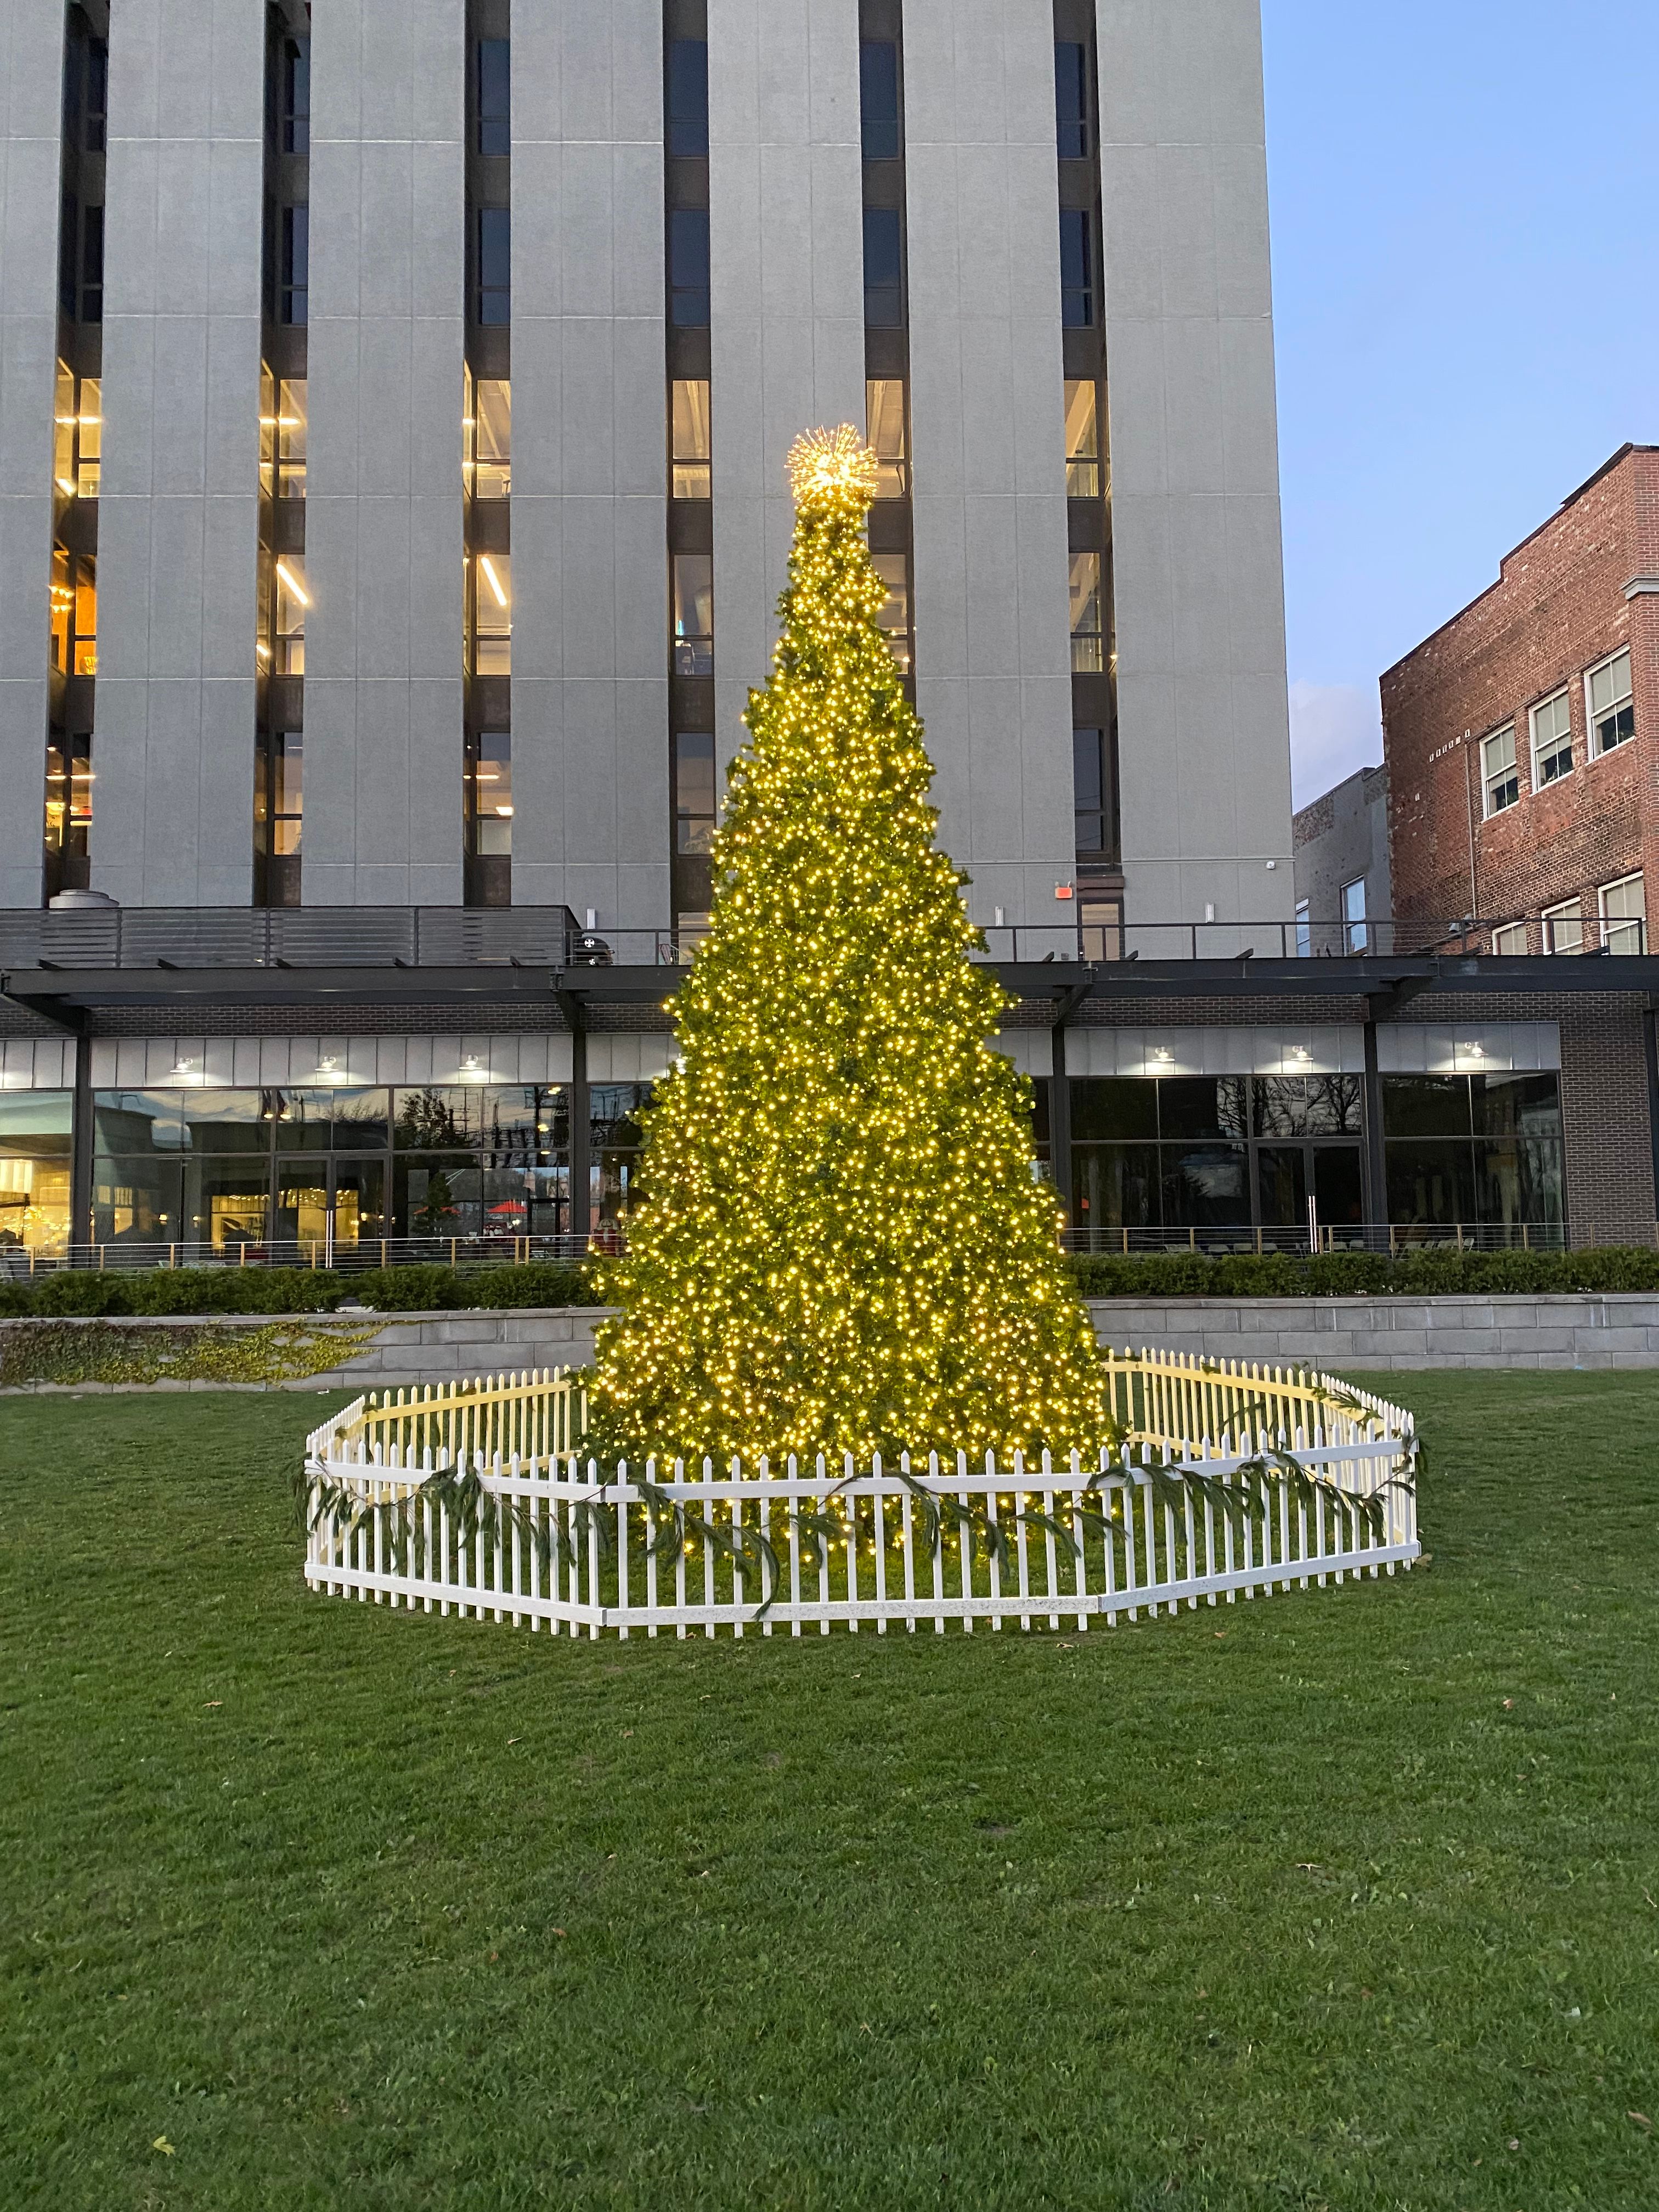 Large-scale Christmas tree in a city